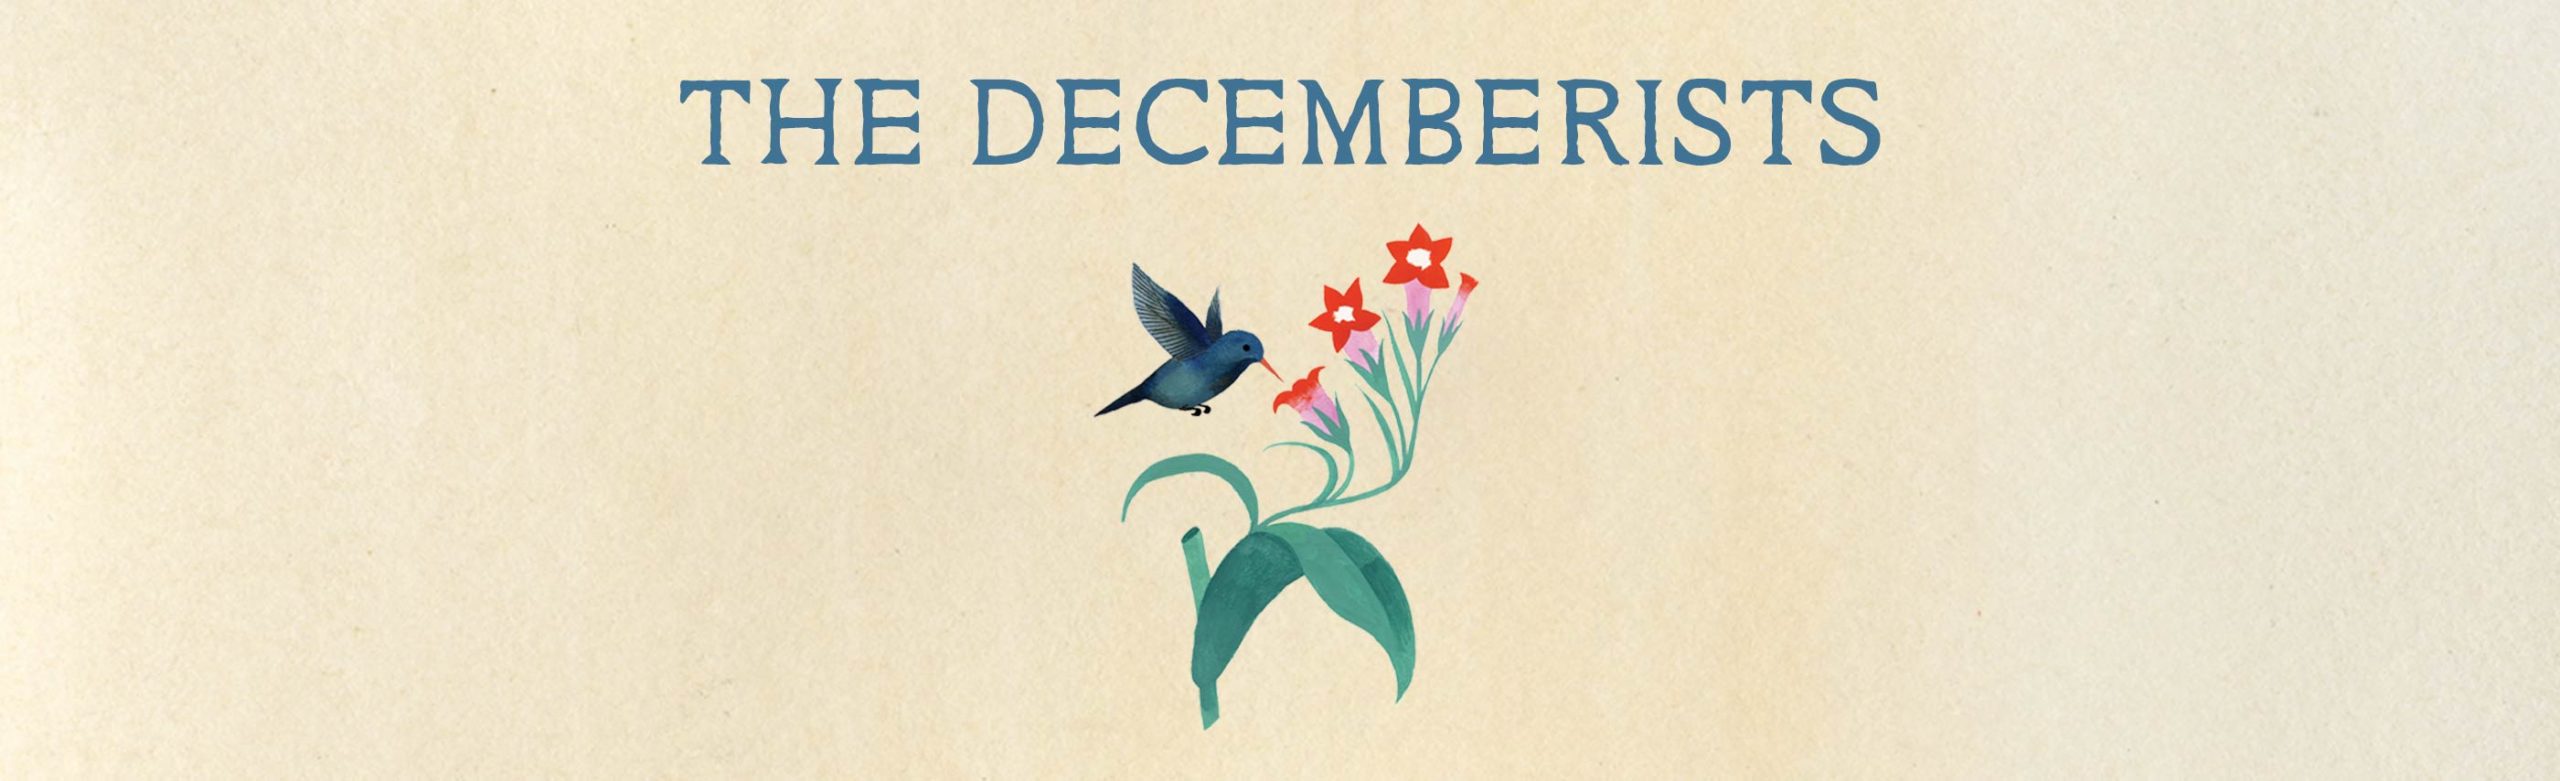 The Decemberists Tickets Giveaway 2022 Image